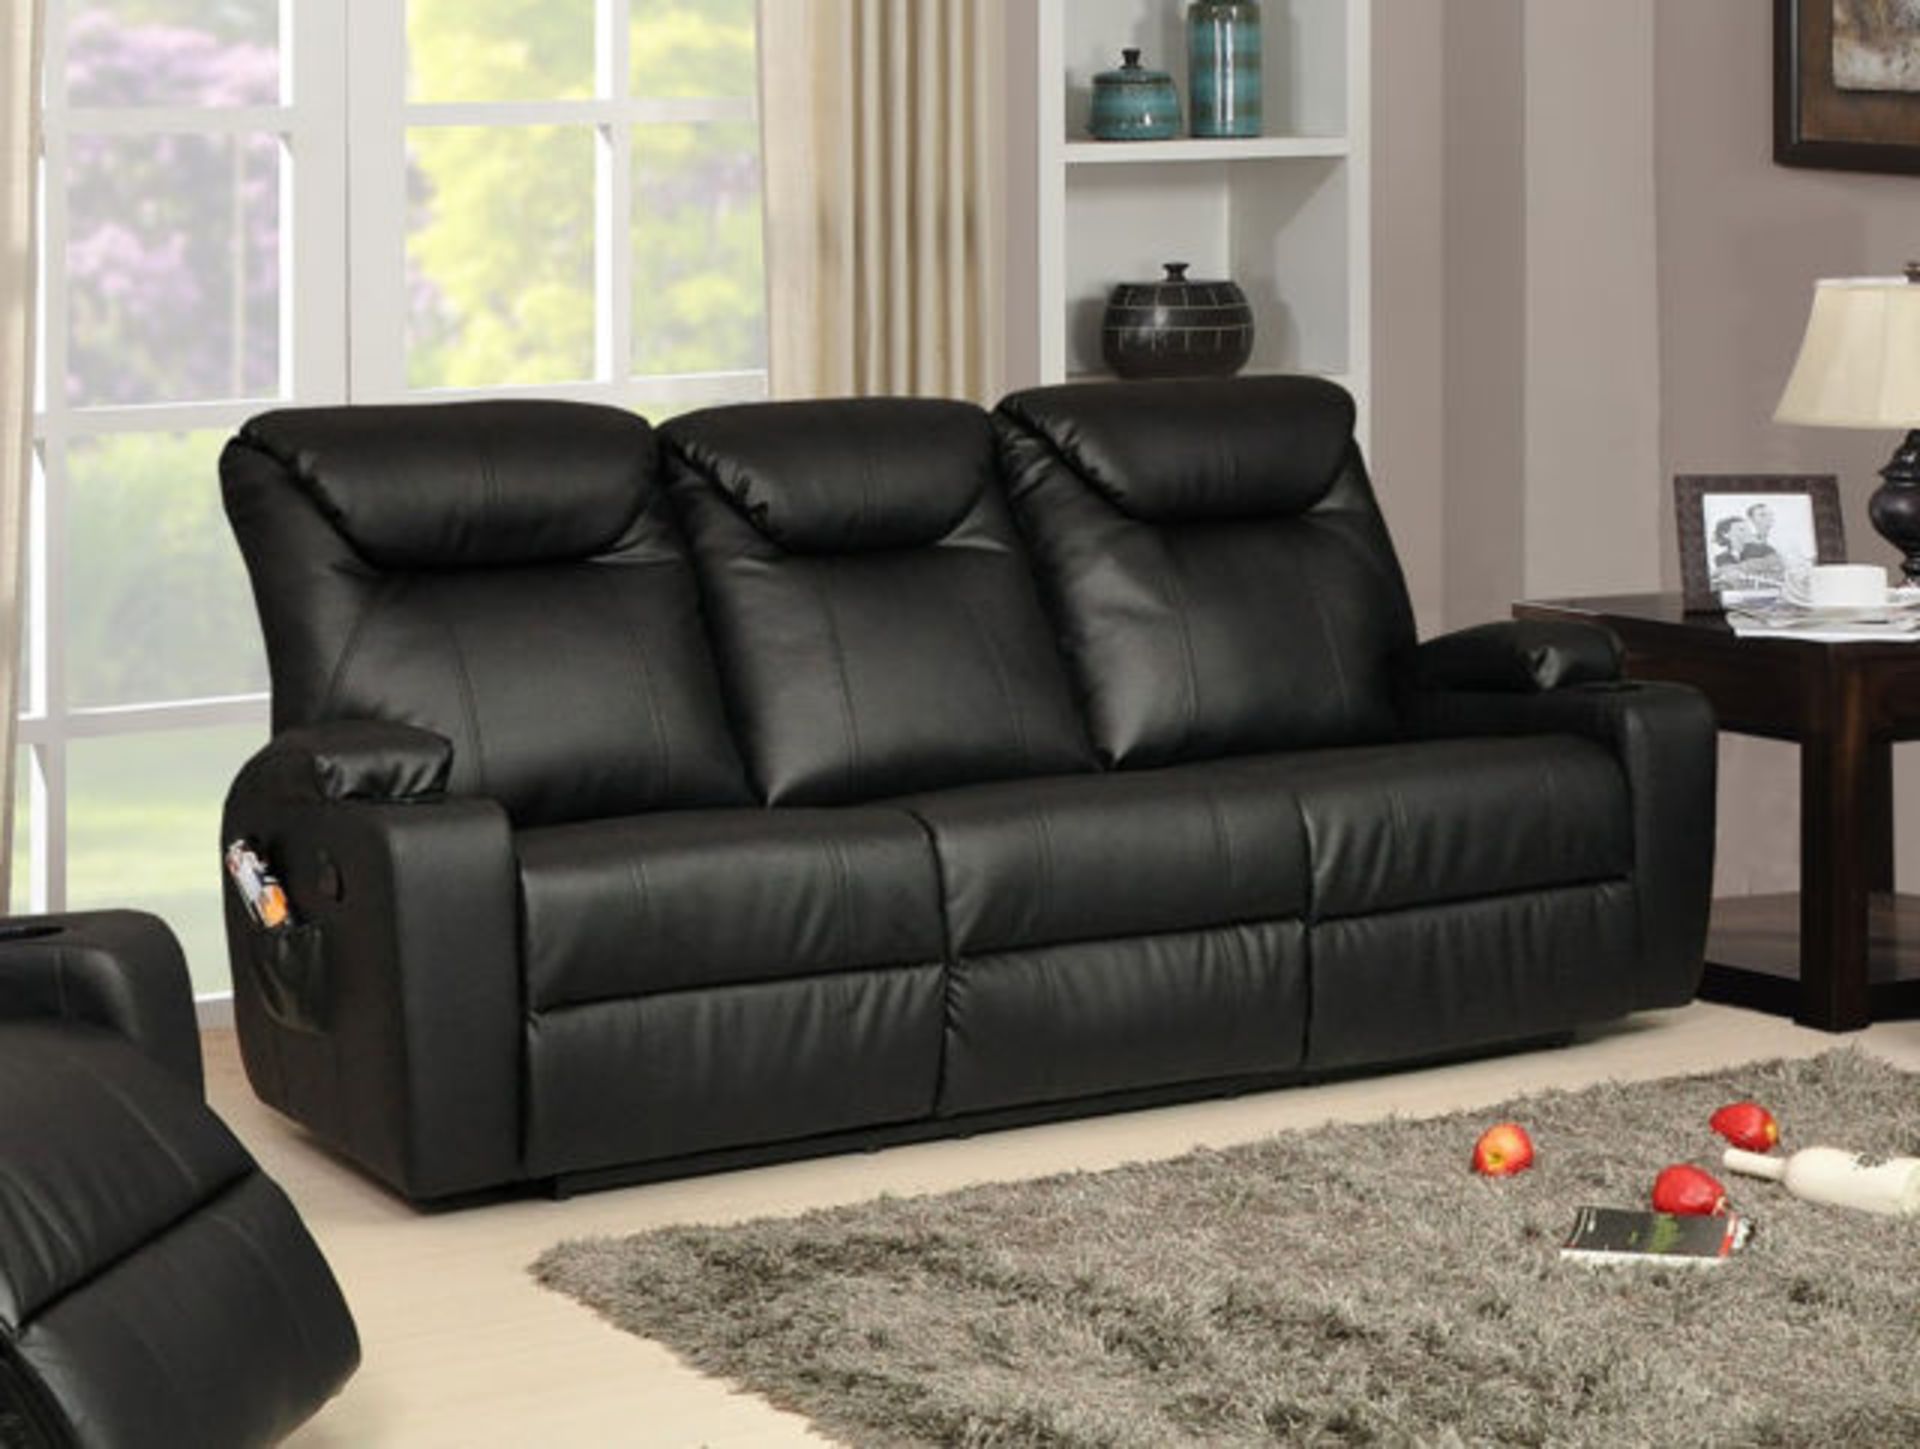 Brand New Boxed 3 Seater Plus 2 Seater Lazyboy Black Leather Electric Reclining Sofas - Image 2 of 3